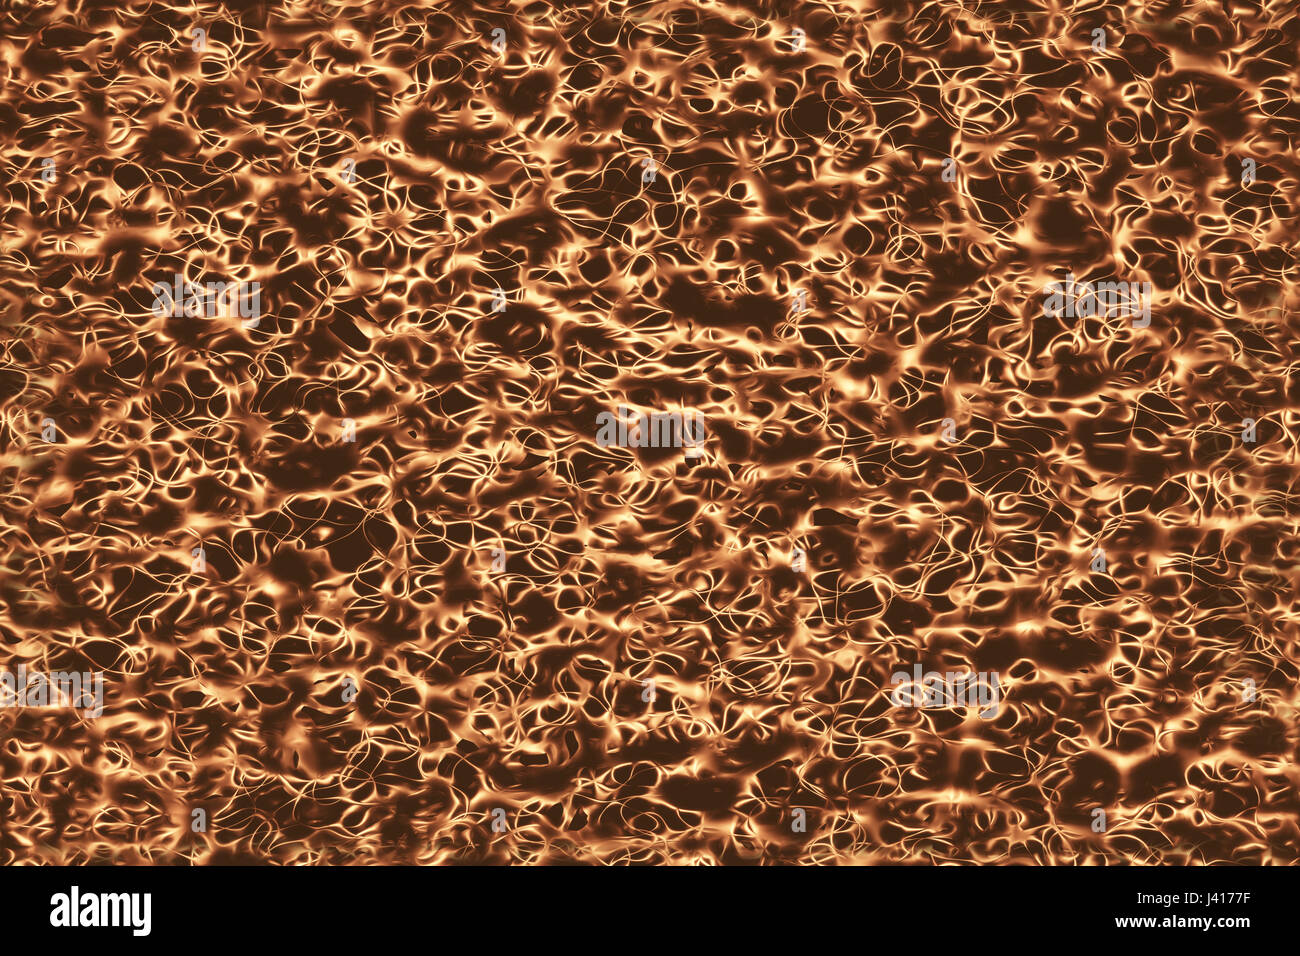 Abstract image of organic tissue, good for use in background and 3D models. Seamless borders. Stock Photo